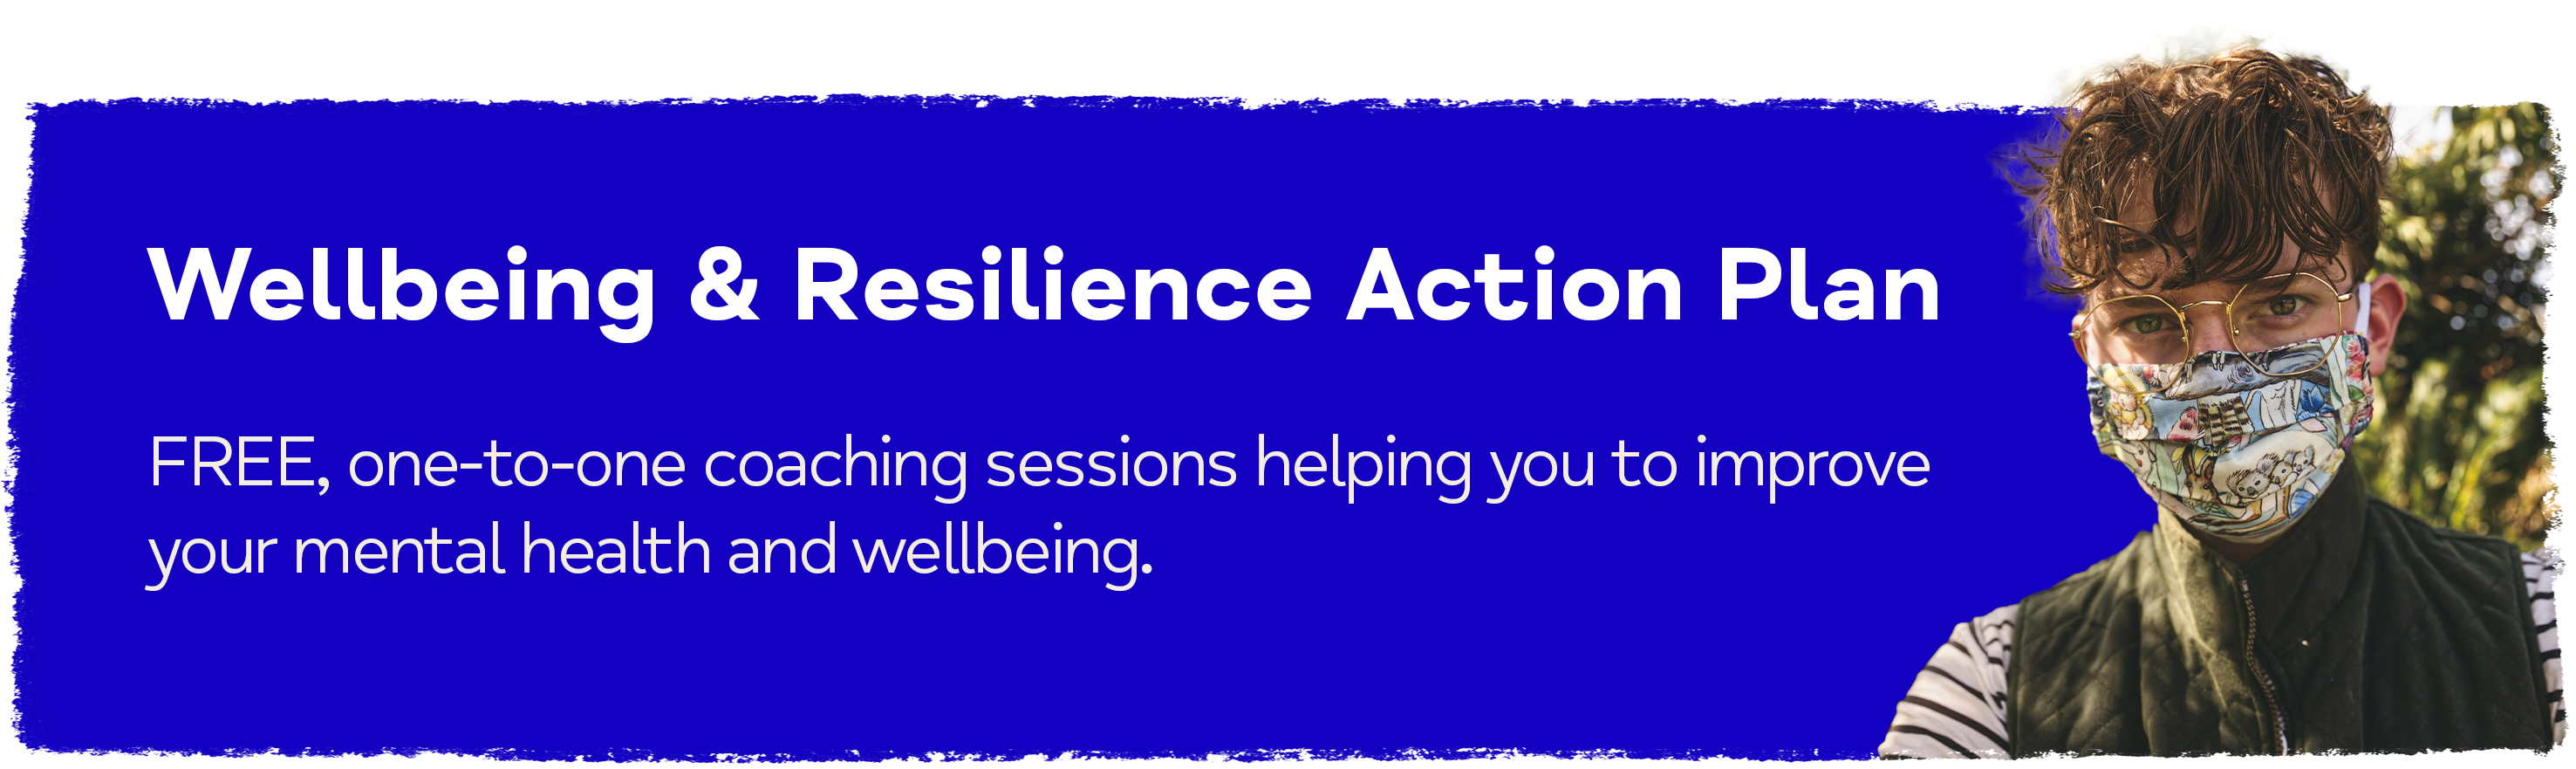 Wellbeing & Resilience Action Plans. FREE, one-to-one coaching sessions helping you to improve your mental health and wellbeing.